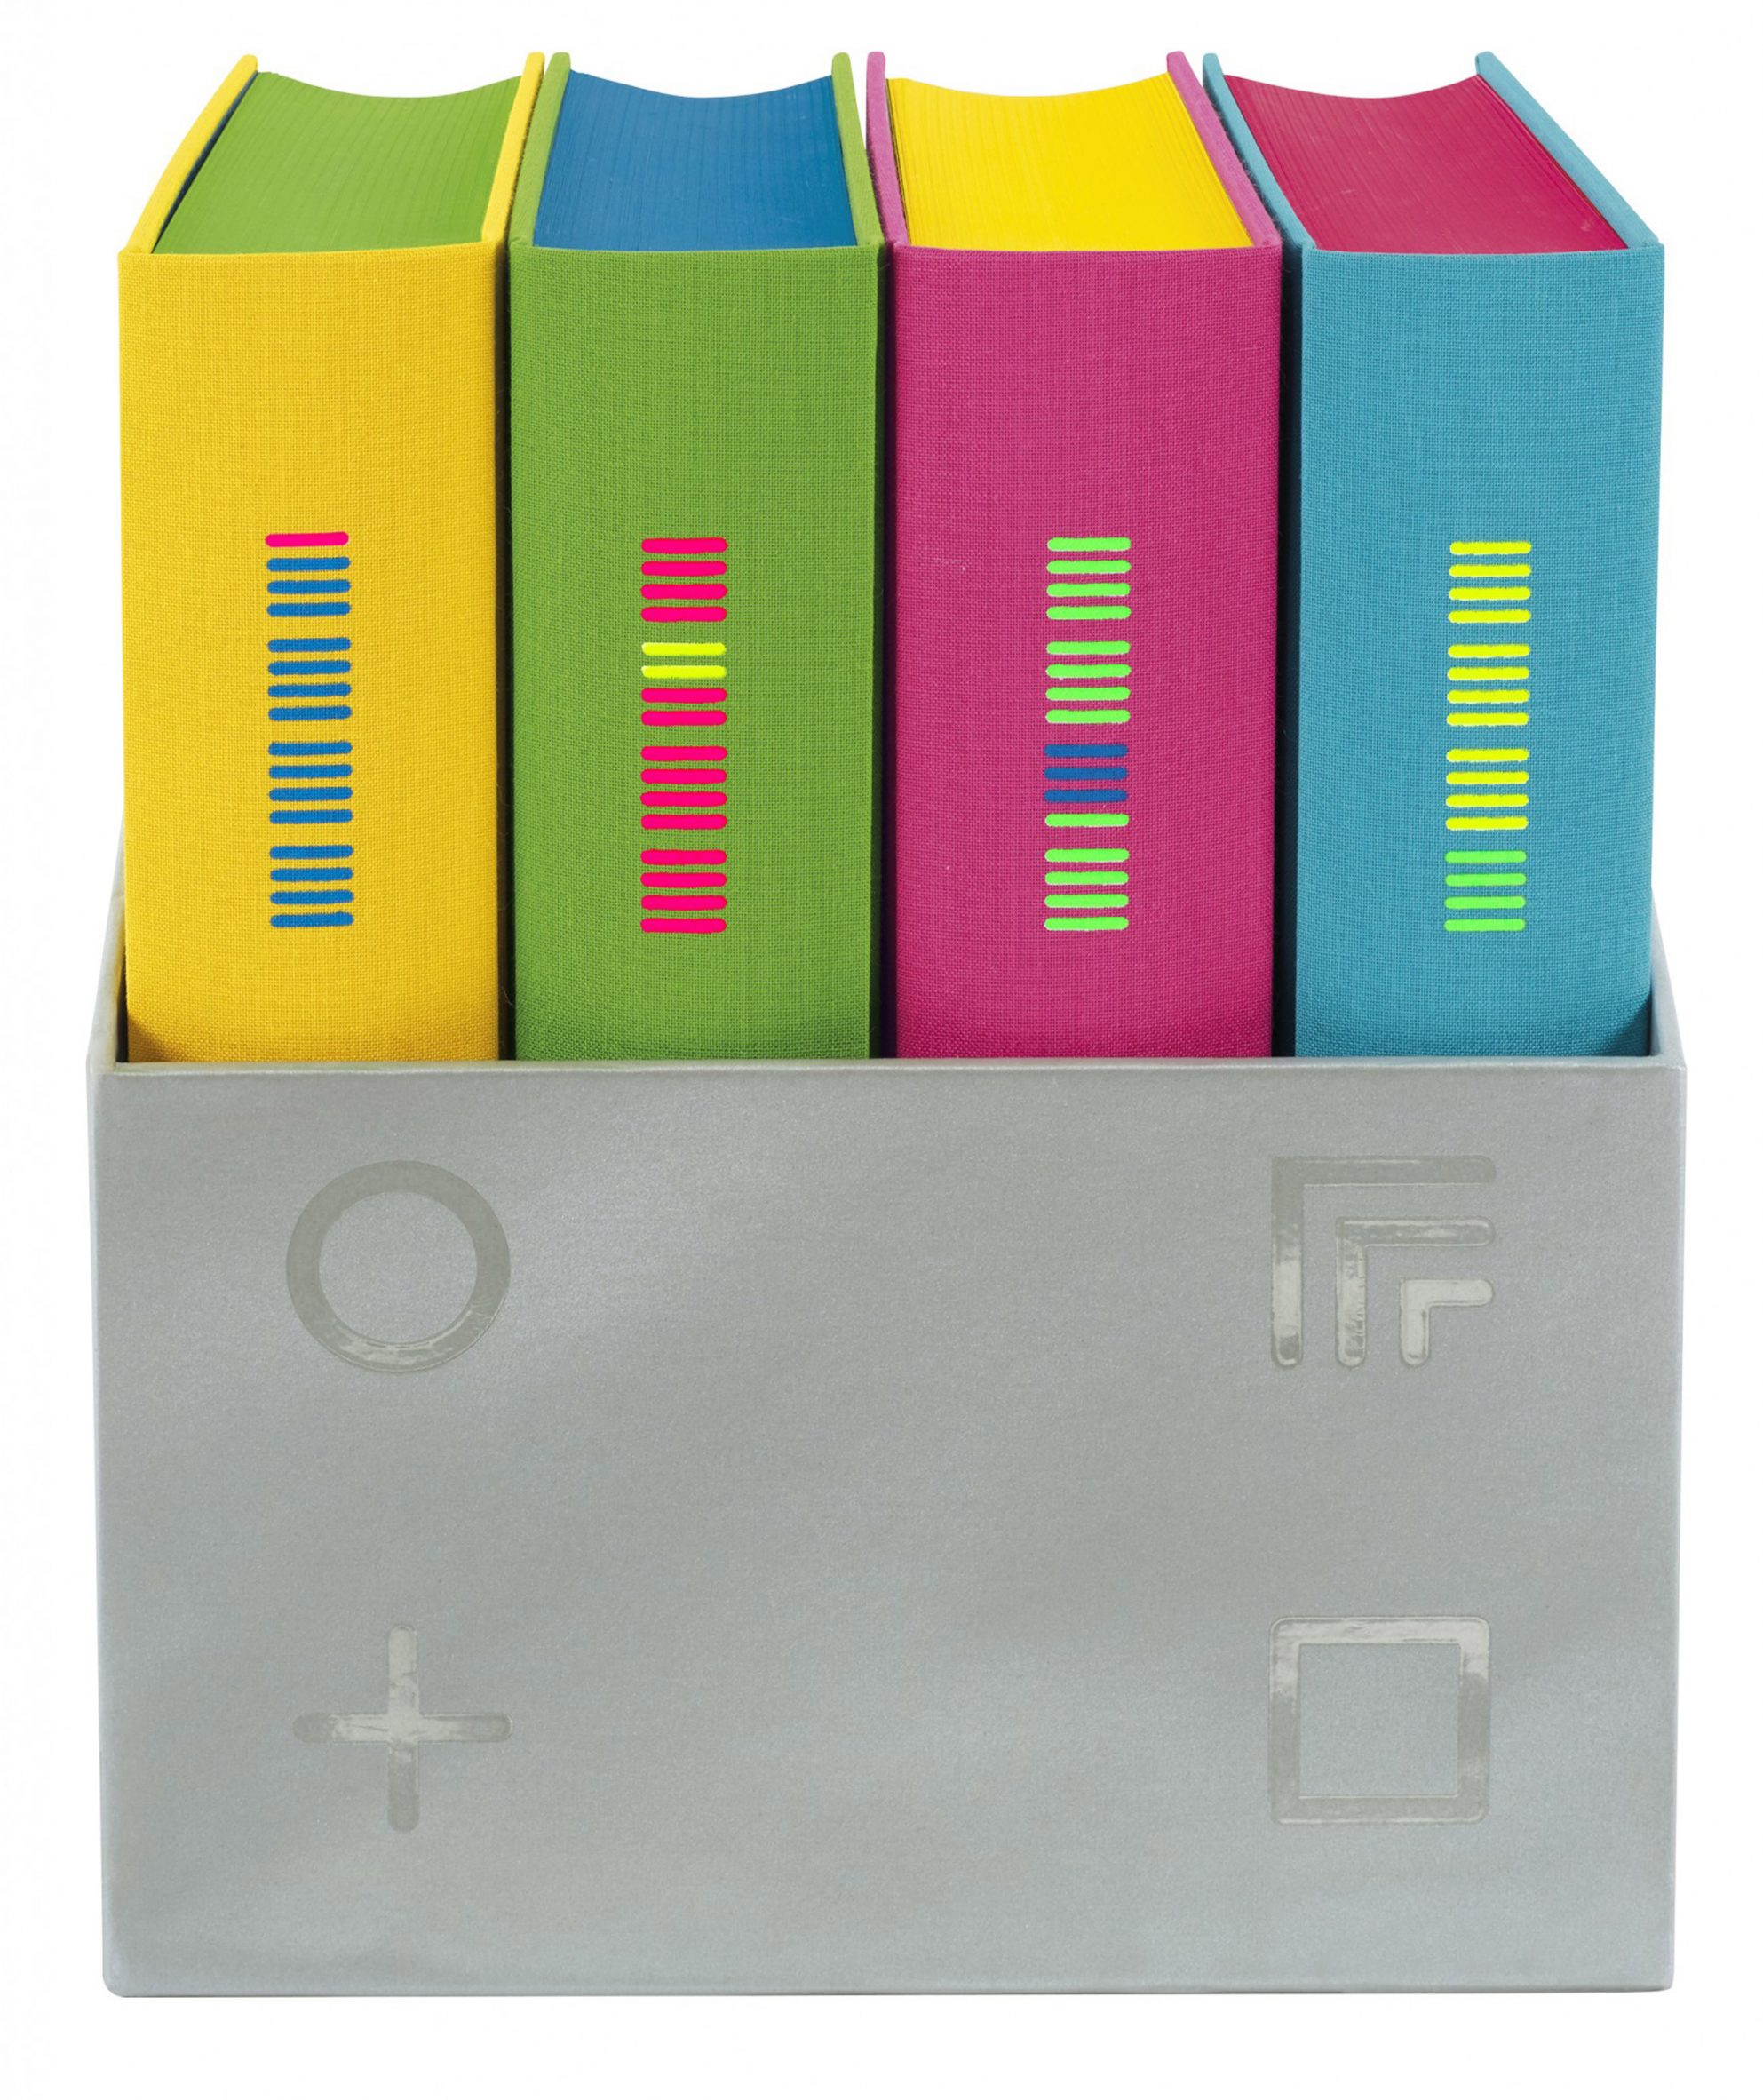 Four volumes of The Complete Short Stories: Philip K. Dick lined up in the presentation box